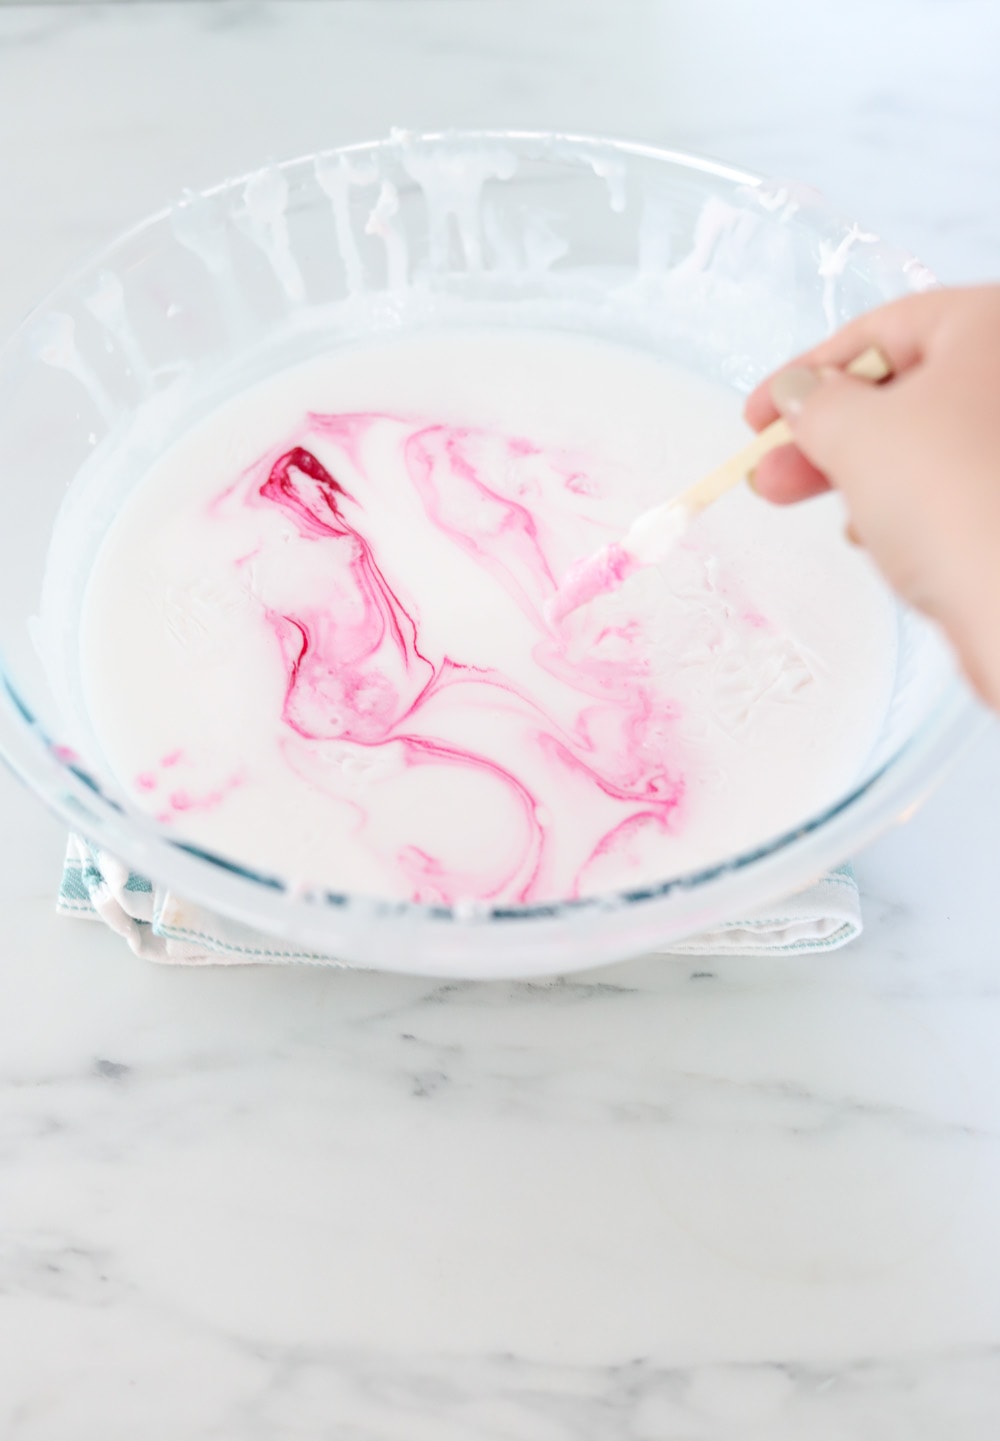 glass bowl full of melted soap with pink color